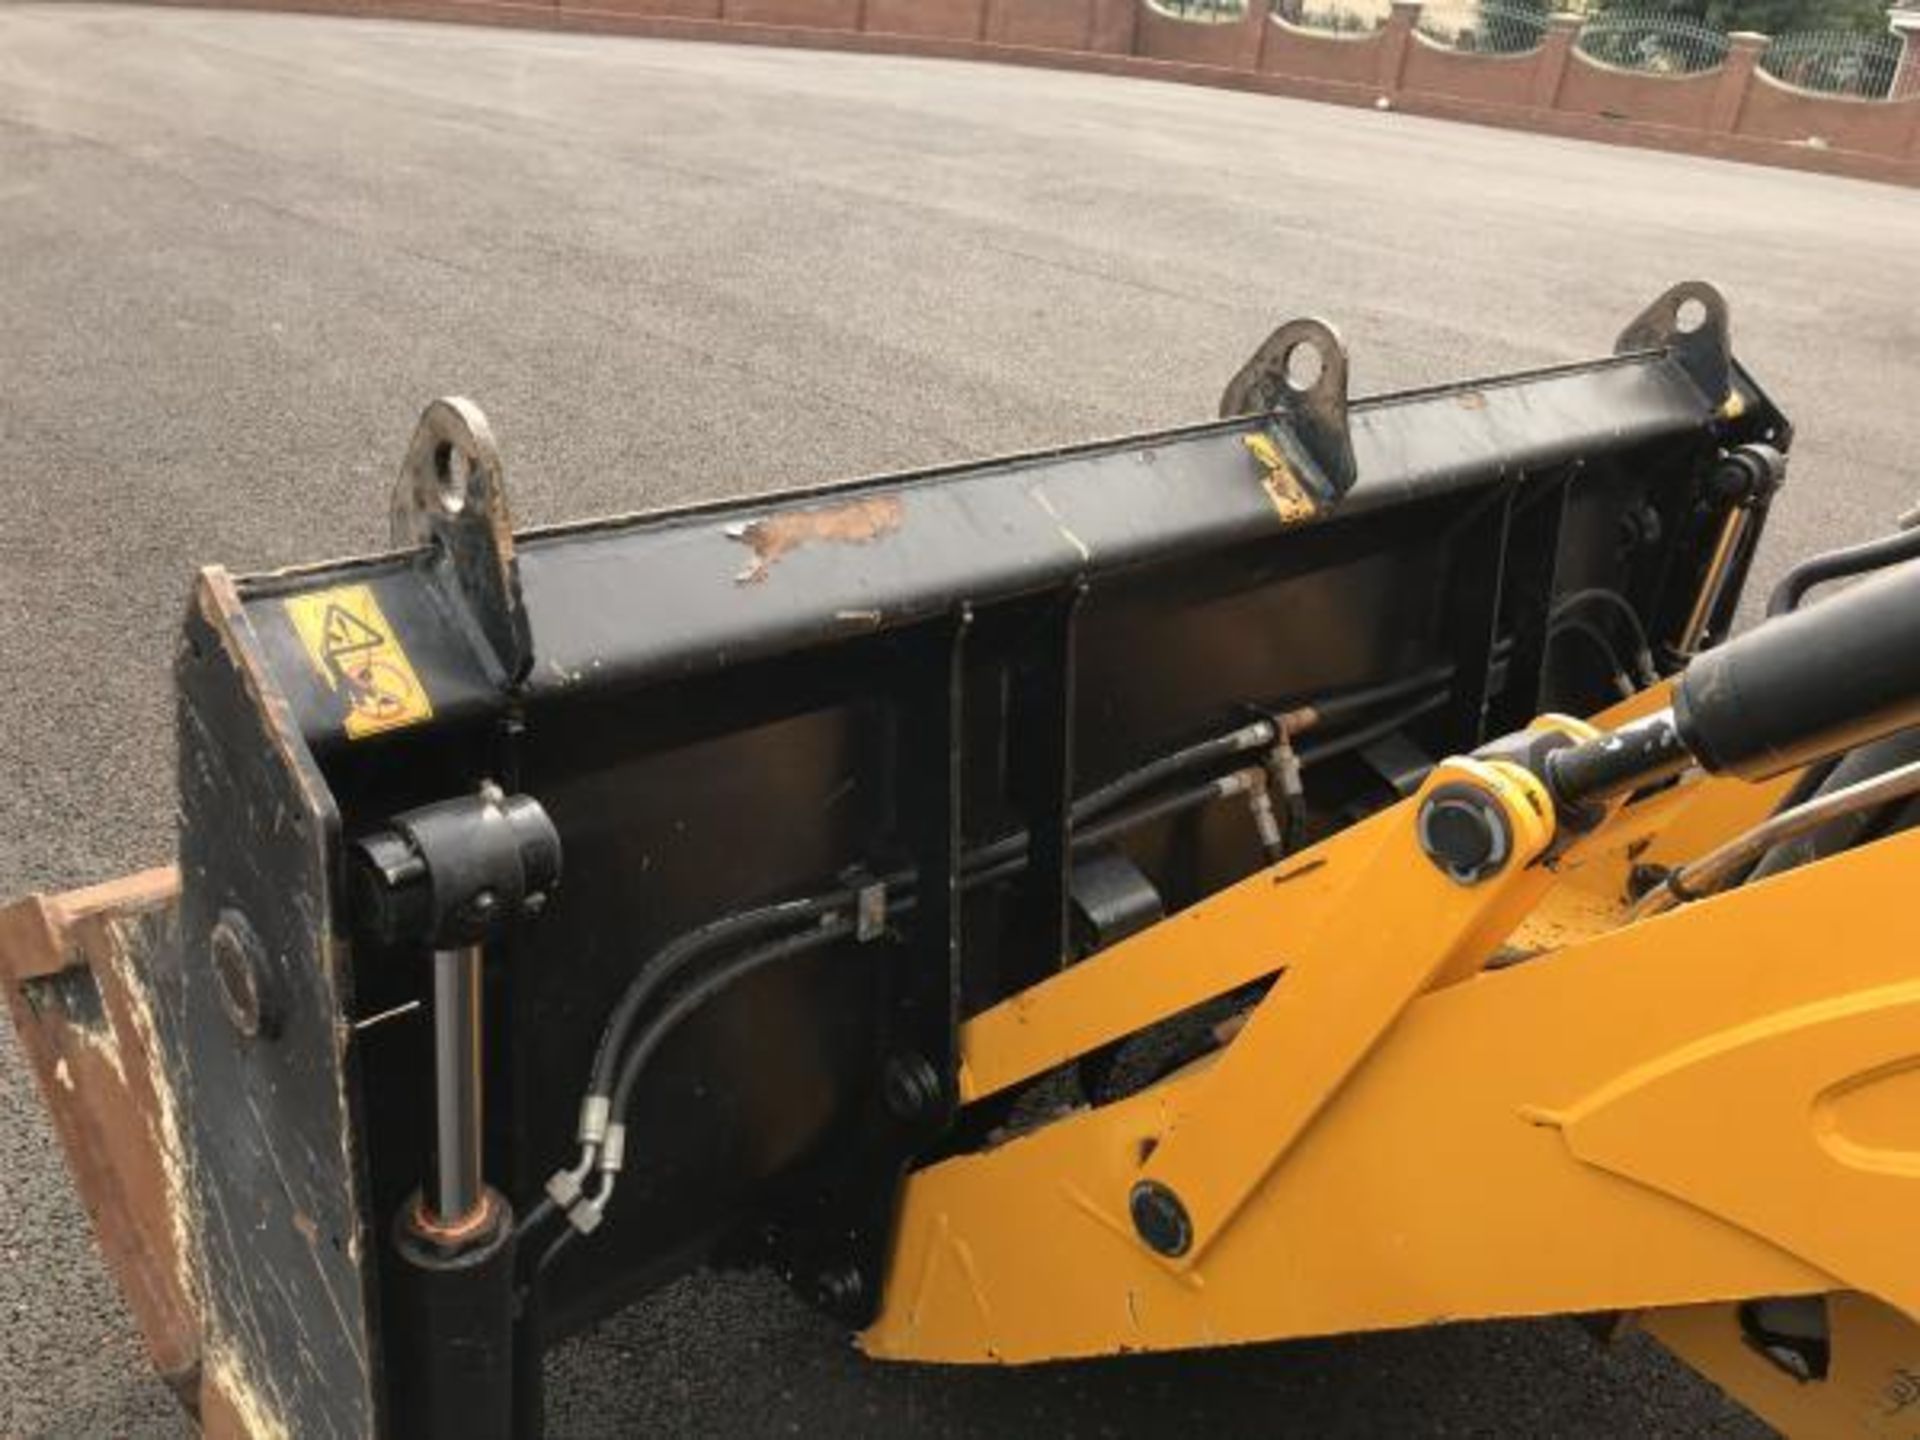 2011 ON 61 PLATE JCB SITEMASTER ECO WITH TORQUELOCK QUICK HITCH *PLUS VAT* - Image 13 of 14